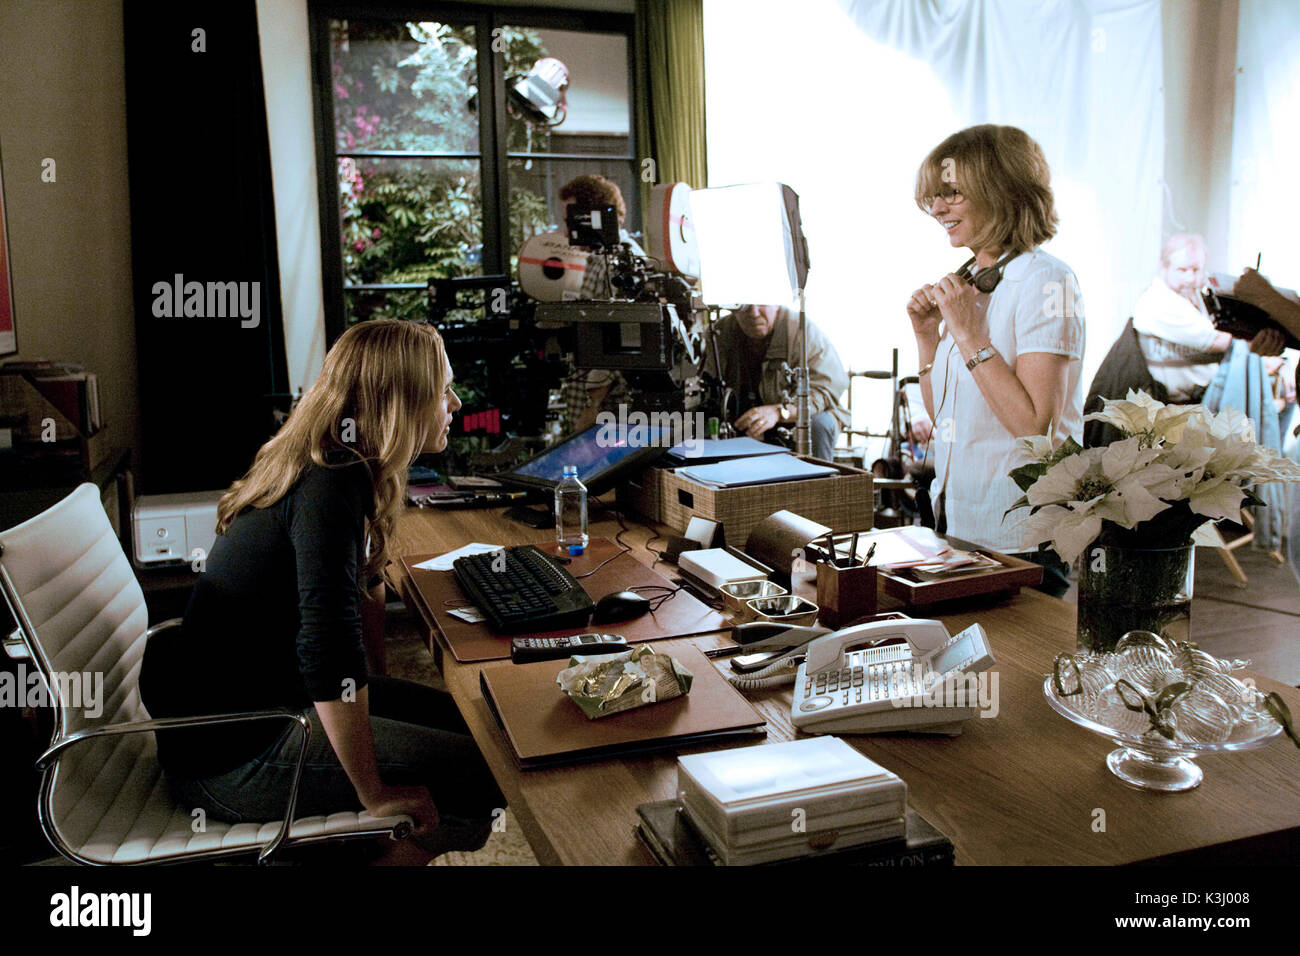 Kate Winslet and Director/Writer/Producer Nancy Meyers on the set of Columbia Pictures/Universal Pictures' romantic comedy The Holiday. THE HOLIDAY KATE WINSLET, Director NANCY MEYERS Kate Winslet (left) and Director/Writer/Producer Nancy Meyers on the set of Columbia Pictures/Universal Pictures romantic comedy The Holiday.     Date: 2006 Stock Photo